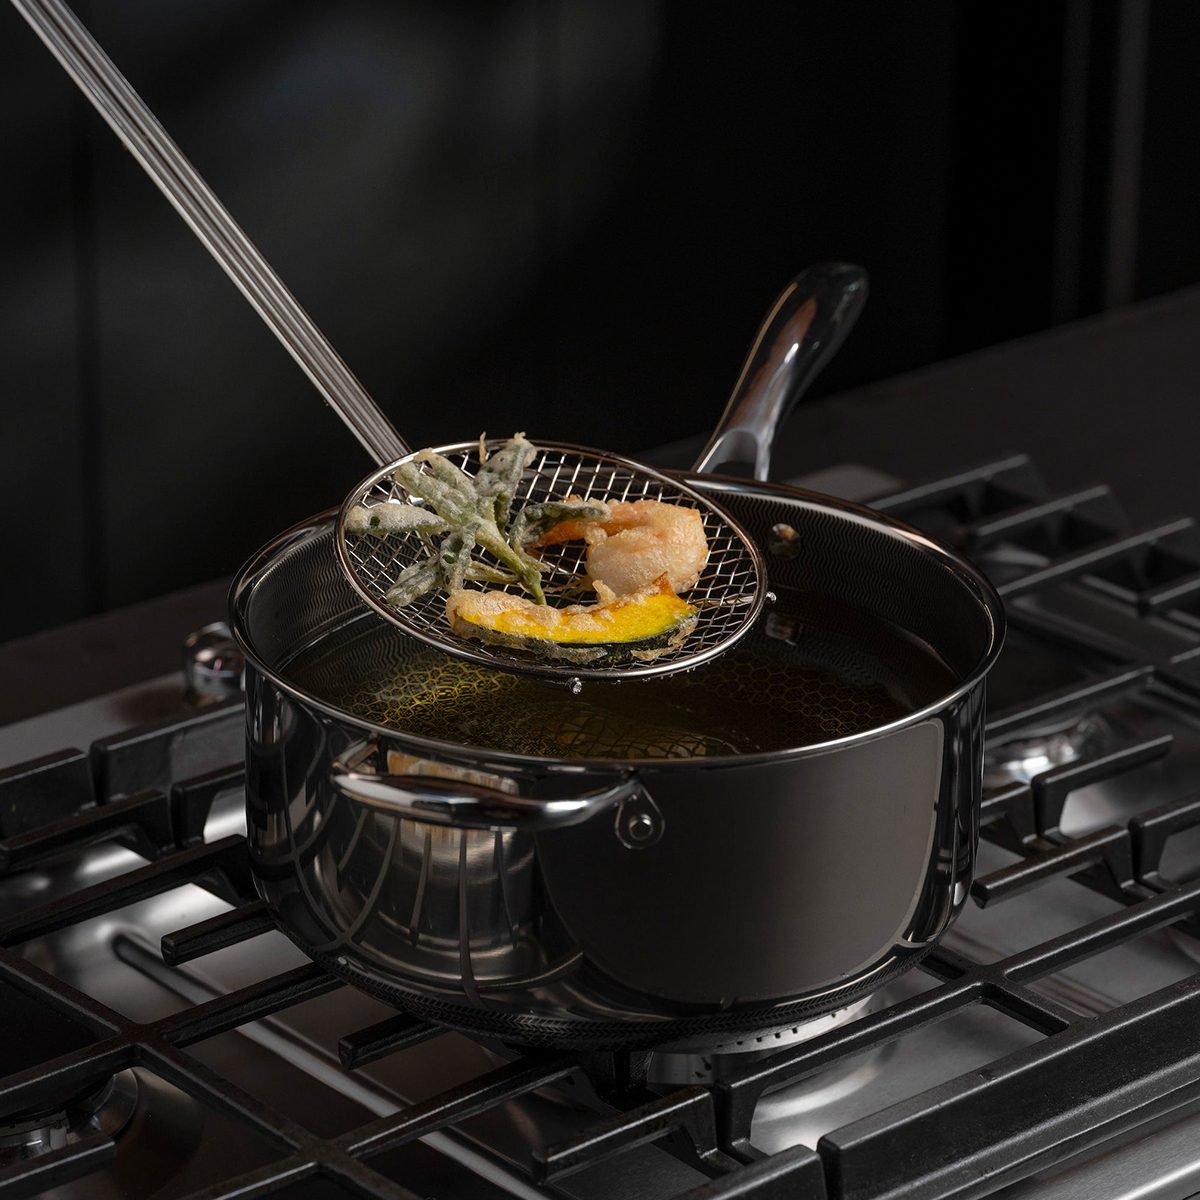 HexClad - The 8-QT Pot in our 6pc Pot Set is the essential soup and stockpot.  Great for a variety of cooking! Have you tried our 6pc Pot Set yet? #hexclad